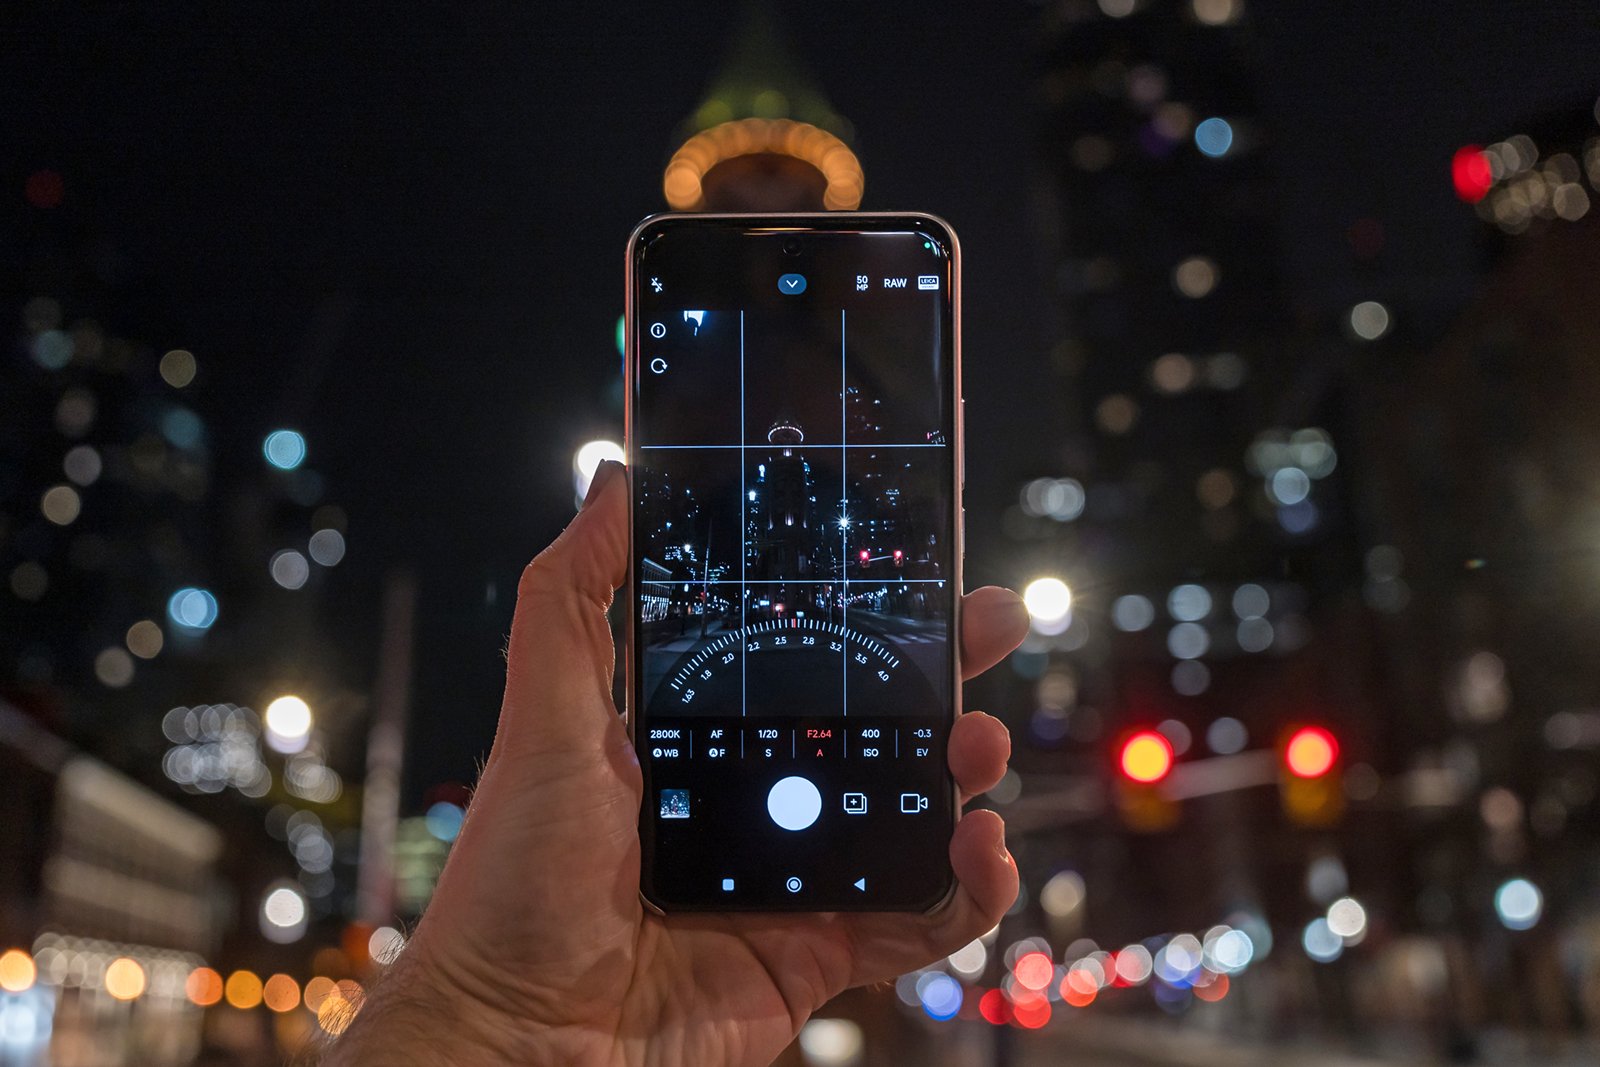 A hand holds a smartphone with its camera app open, capturing a night scene of a city with illuminated buildings and blurred lights in the background.